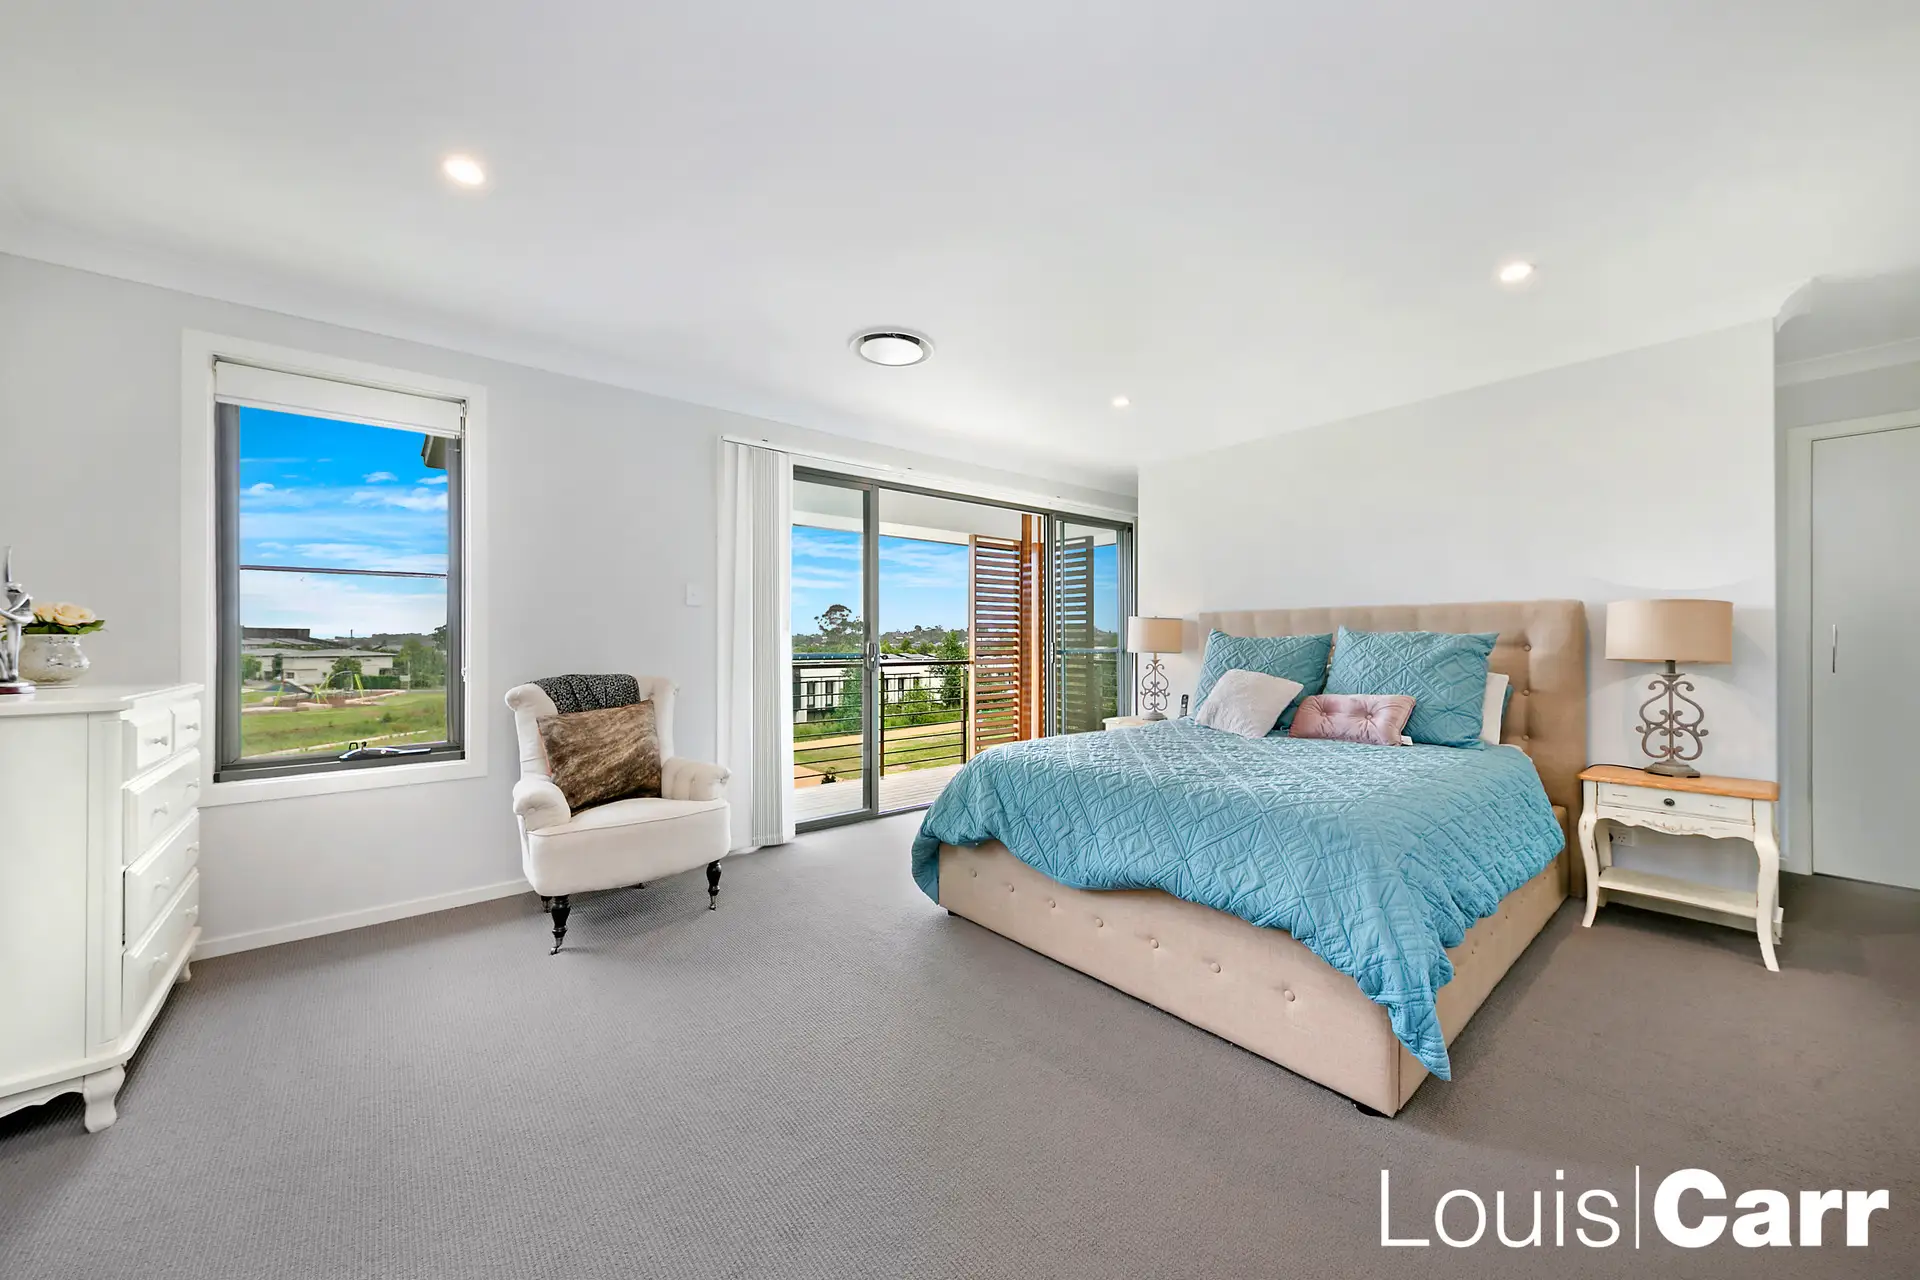 Photo #4: 17 Florence Avenue, Kellyville - Sold by Louis Carr Real Estate